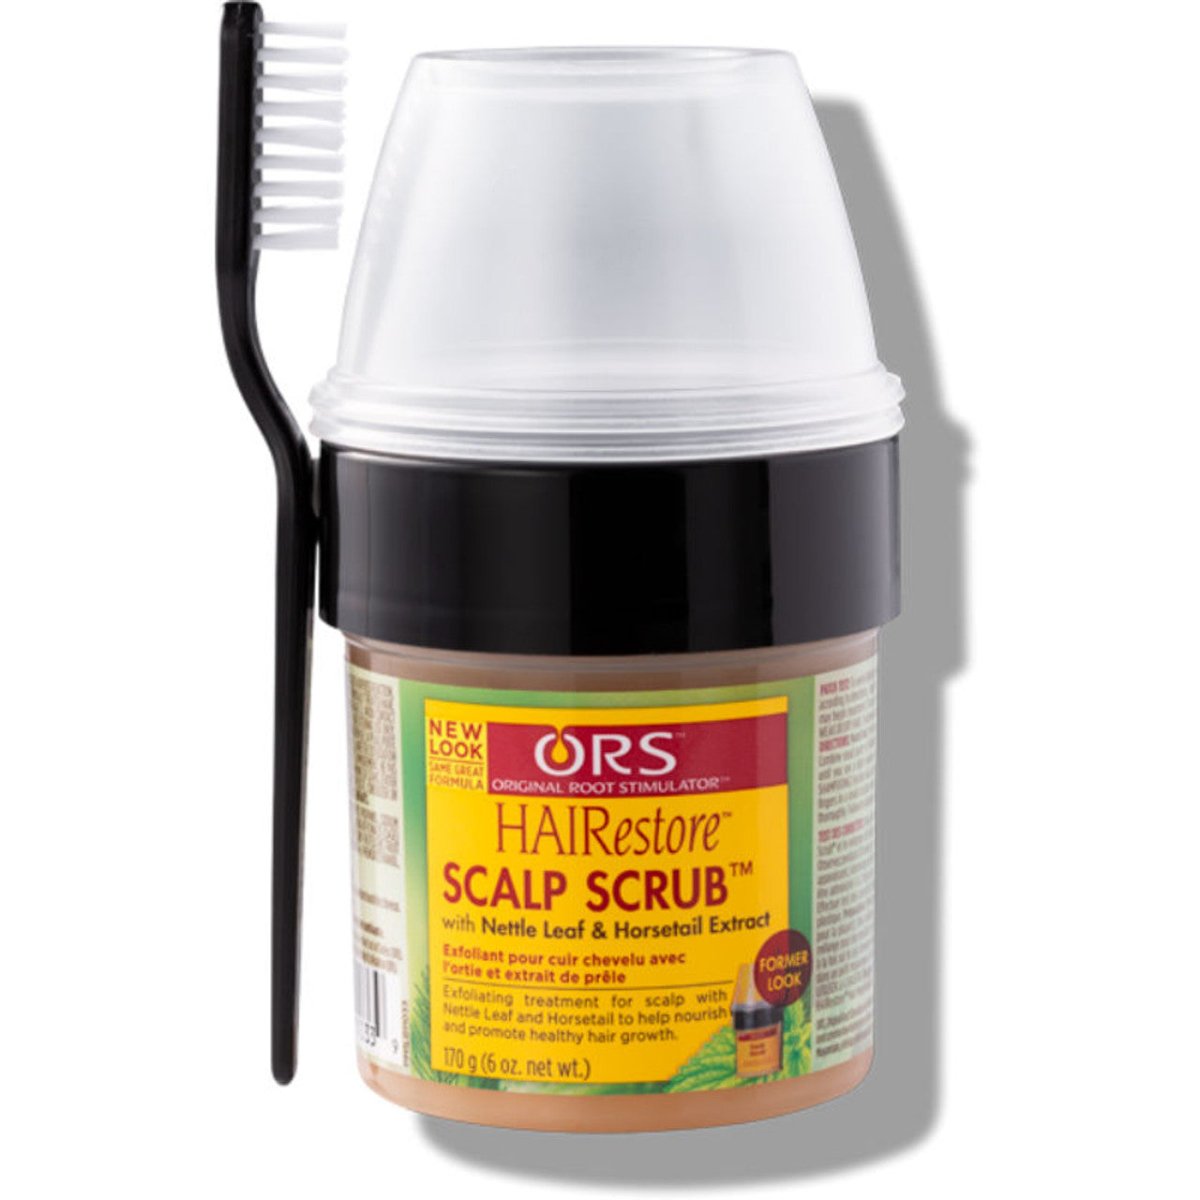 ORS HaiRestore Scalp Scrub with Nettle Leave & Horsetail Extract - Southwestsix Cosmetics ORS HaiRestore Scalp Scrub with Nettle Leave & Horsetail Extract Southwestsix Cosmetics Southwestsix Cosmetics 632169110339 ORS HaiRestore Scalp Scrub with Nettle Leave & Horsetail Extract